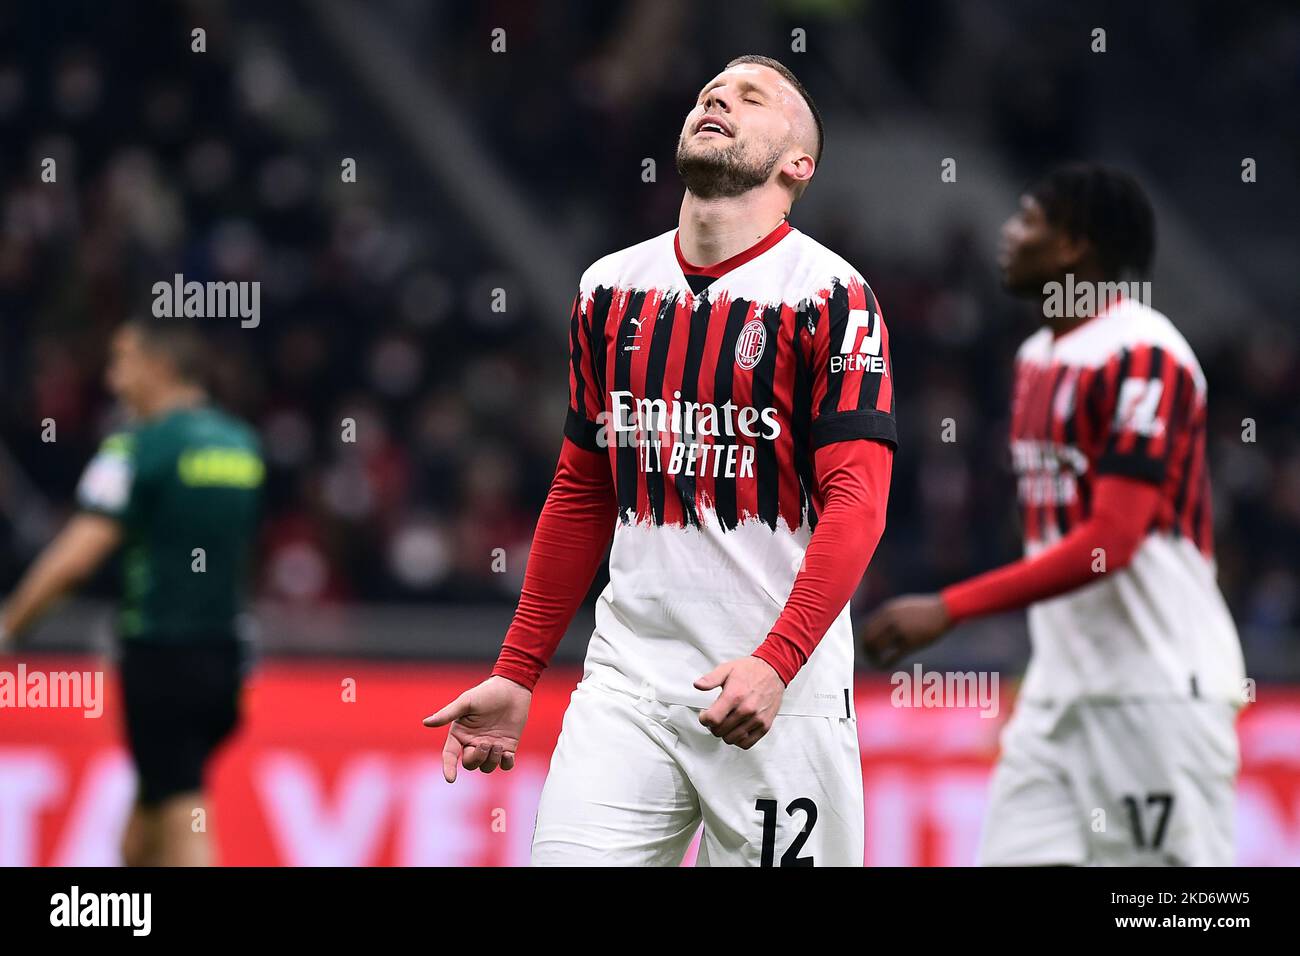 Disappointed Ante Rebic A.C. Milan during the Italian Serie A soccer match between A.C. Milan vs Bologna F.C. at the San Siro Stadium in Milan, Italy on 4 April 2022. (Photo by Michele Maraviglia/NurPhoto) Stock Photo